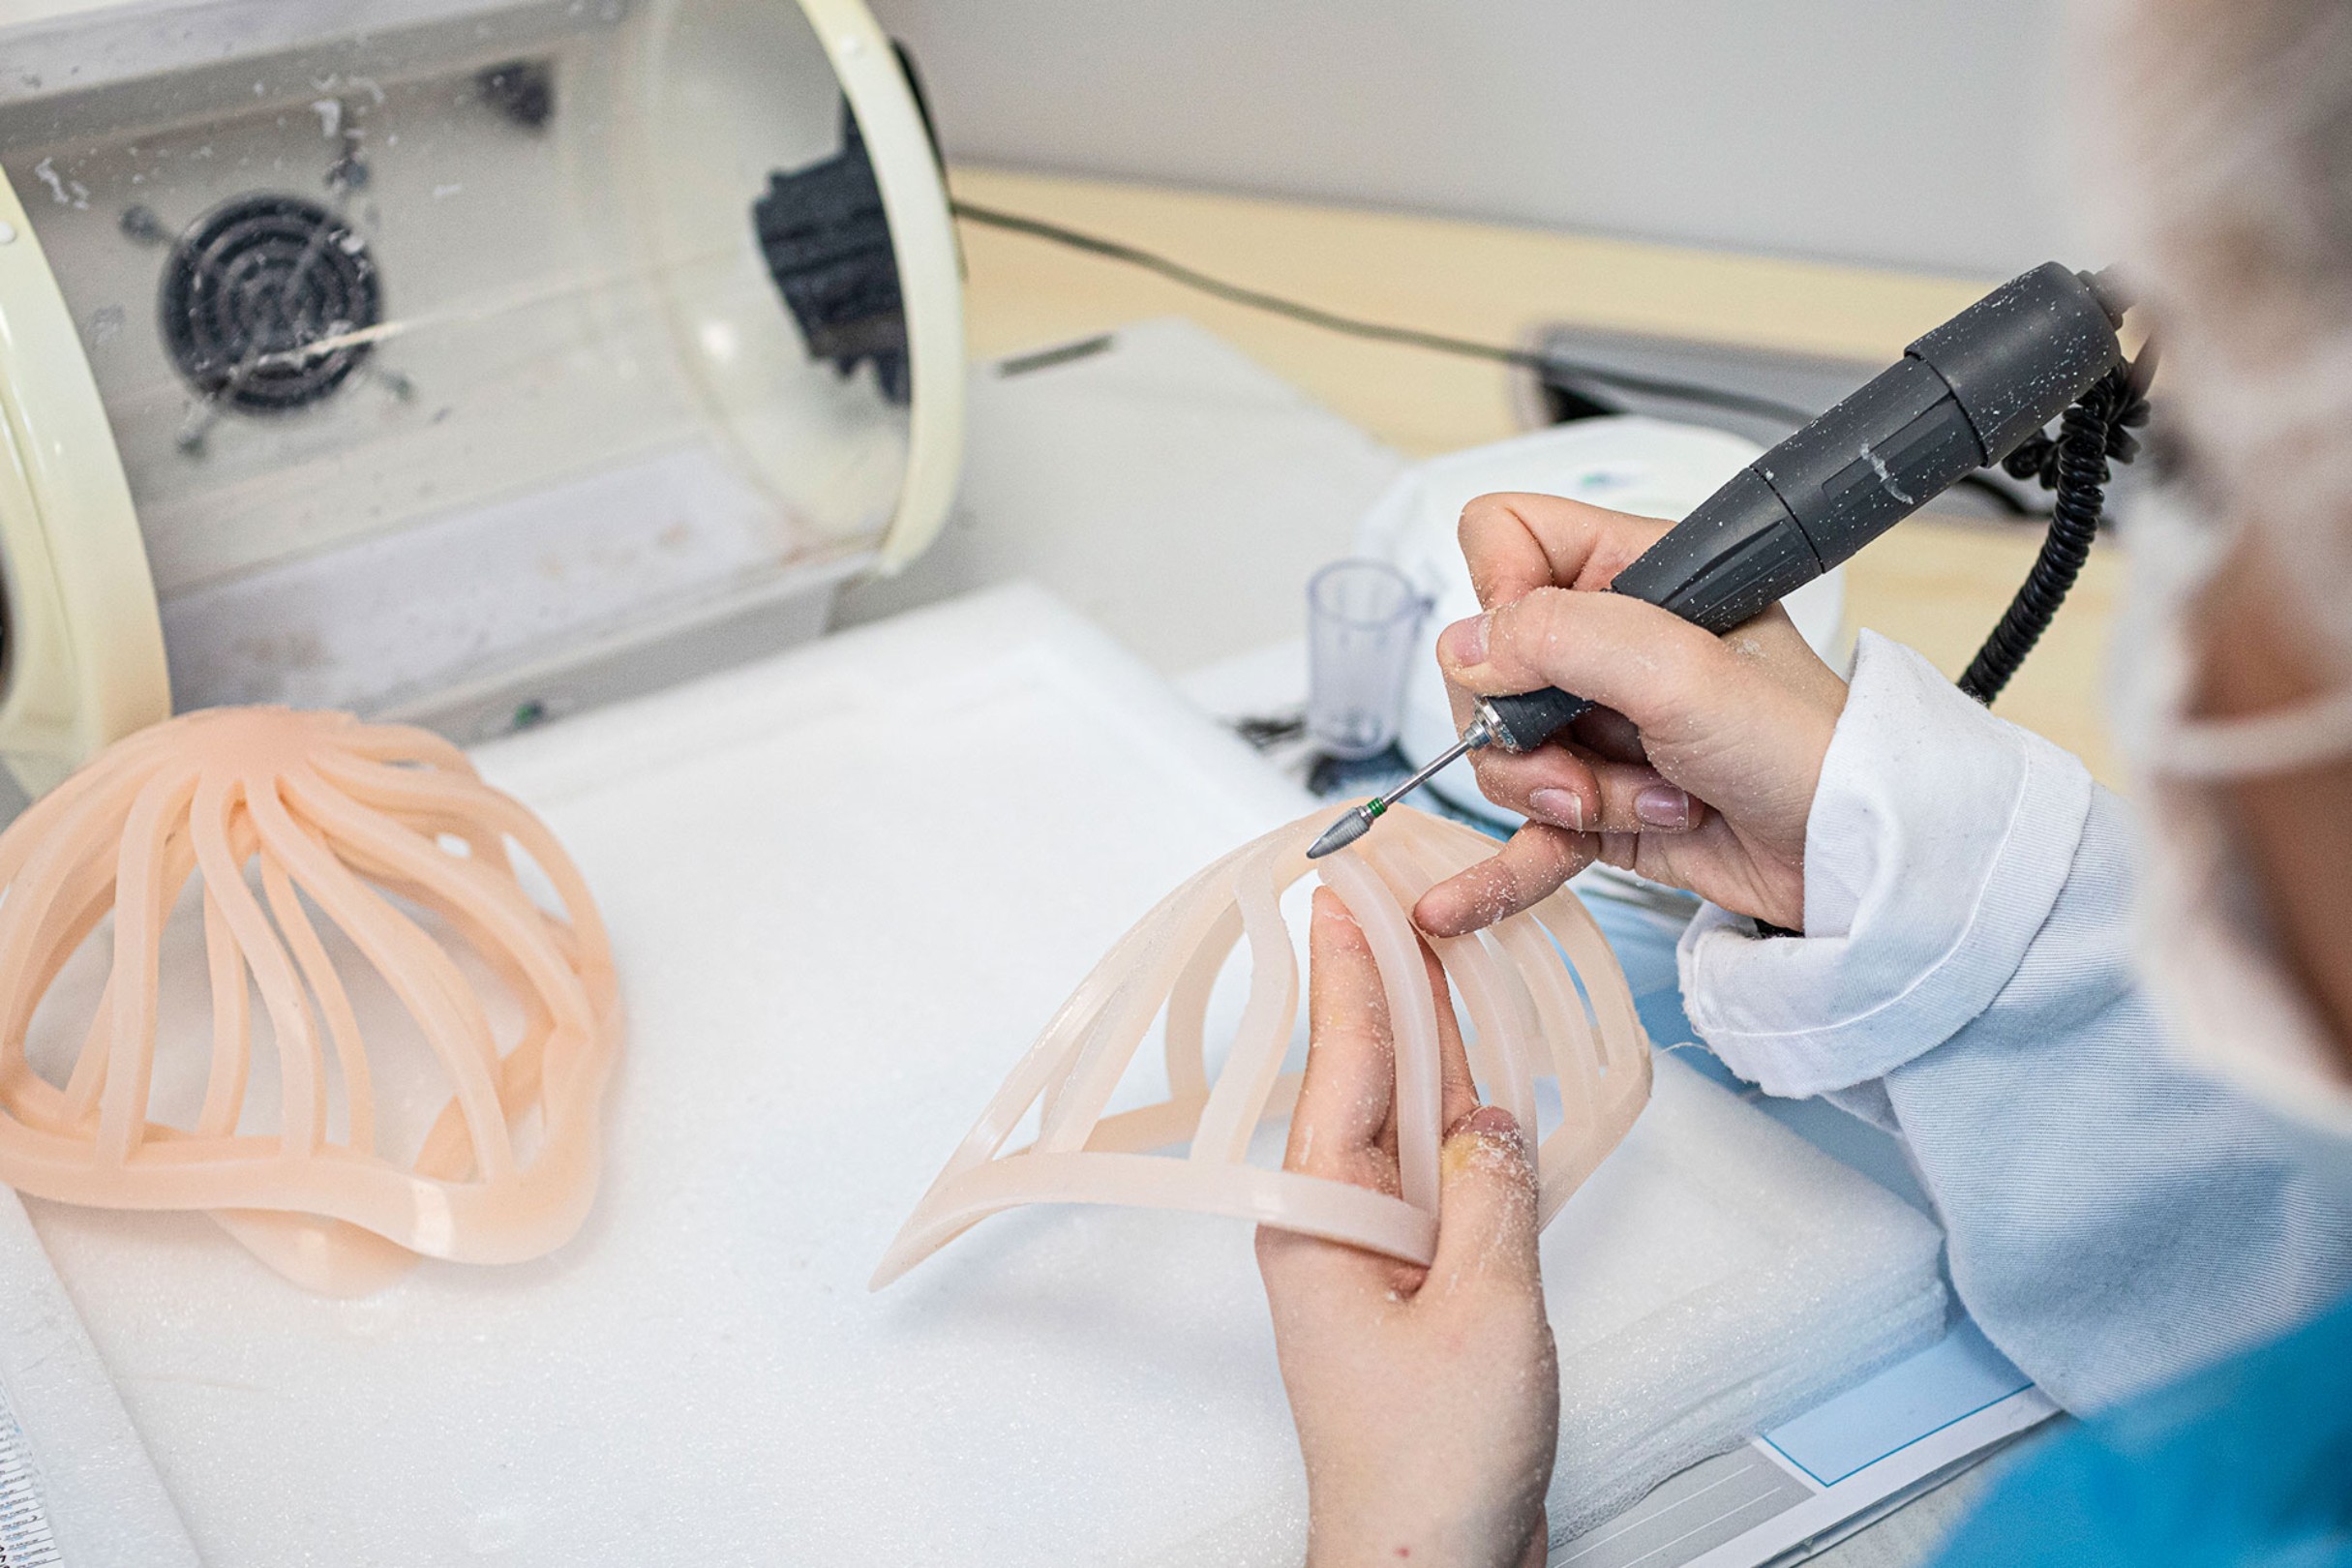 An AIR’AVANTI prosthesis is sanded by hand.